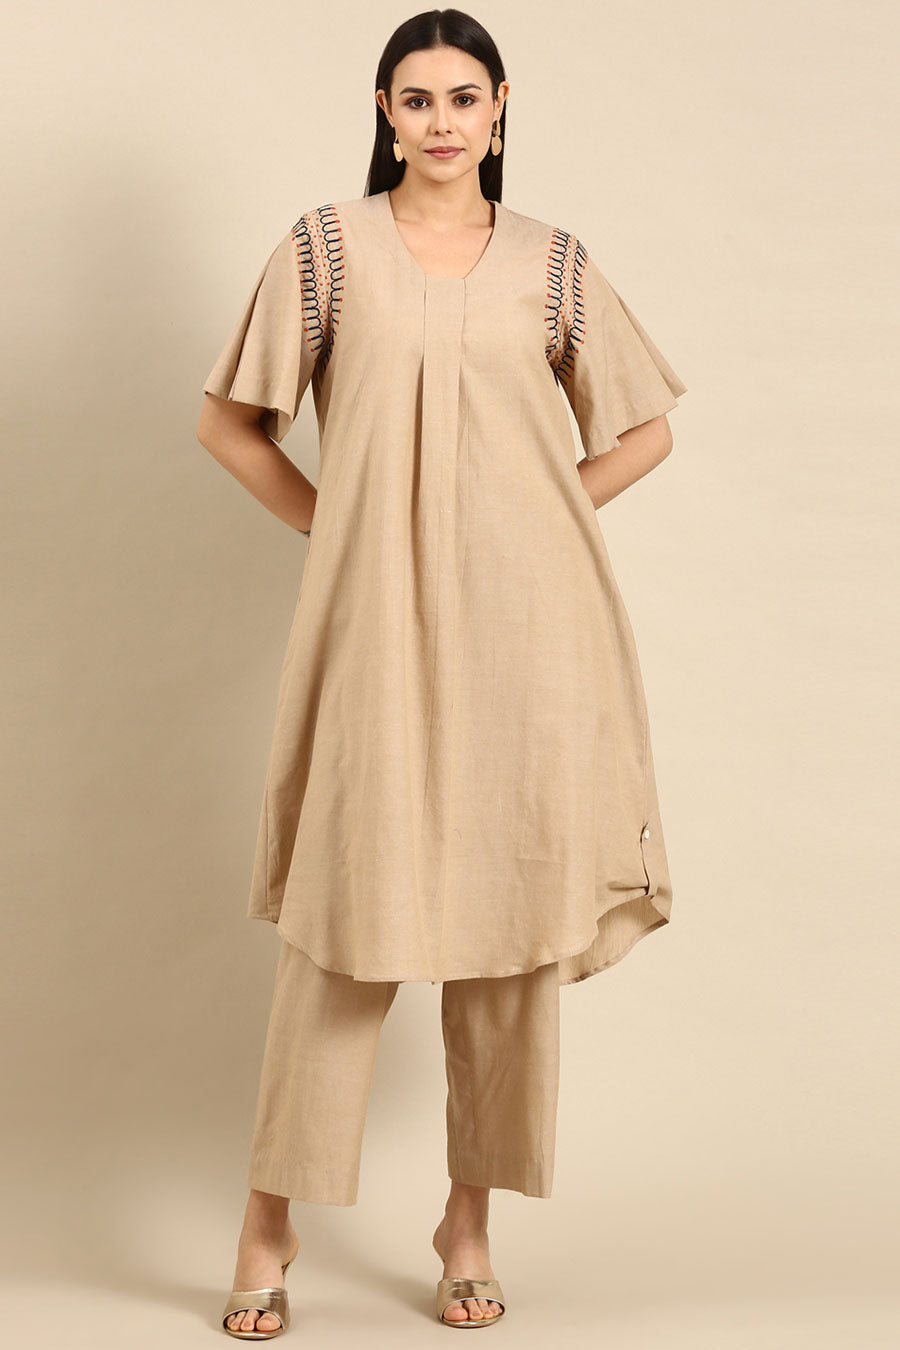 Beige Embroidered A-Line Tunic Dress